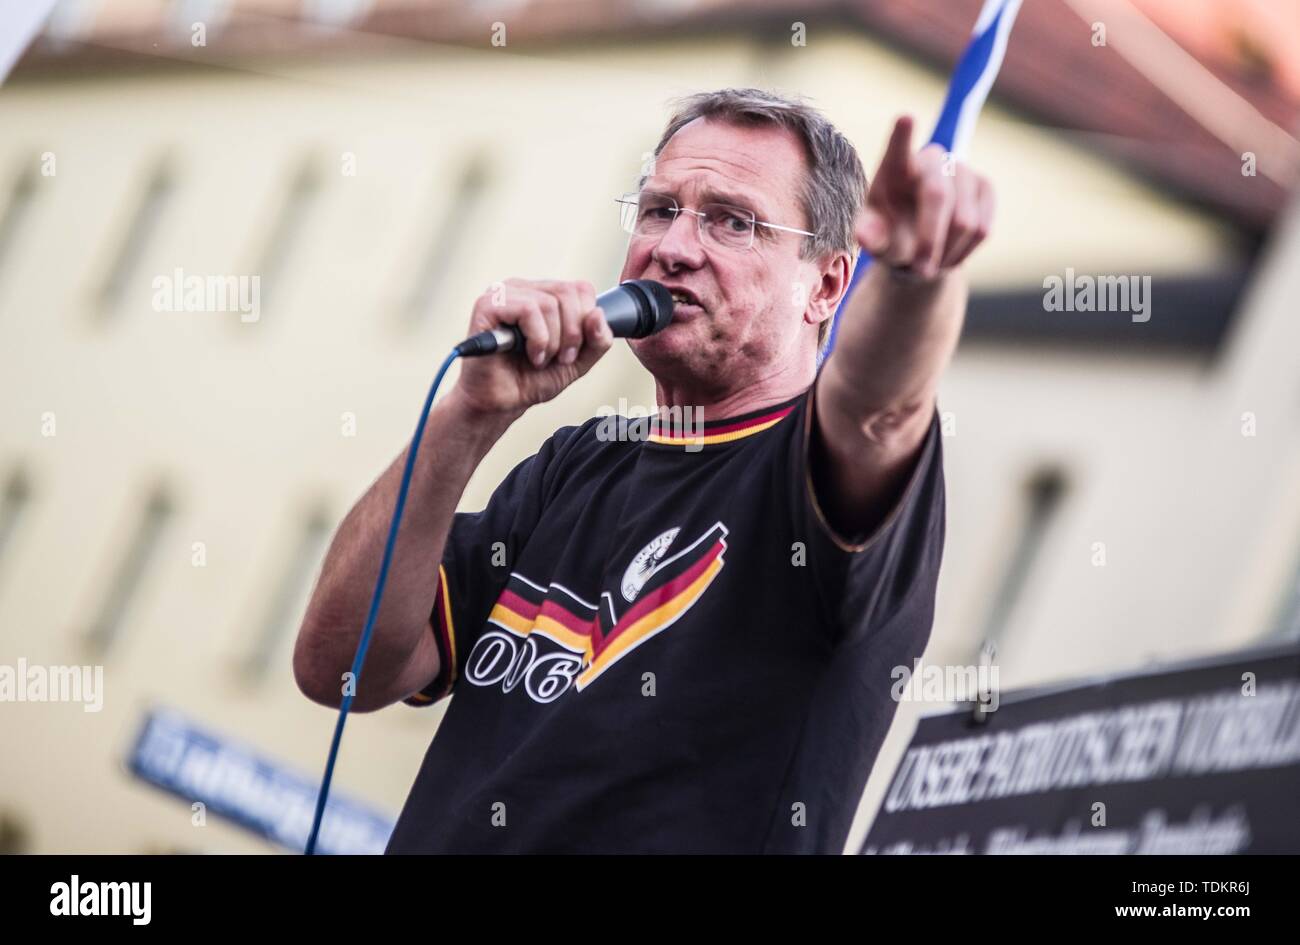 Munich, Bavaria, Germany. 17th June, 2019. MICHAEL STUERZENBERGER appearing at a Buergerbewegung Pax Europa far-right demonstration in Munich, Germany. Headed by the Verfassungsschutz (Secret Service) monitored Michael Stuerzenberger, the Buergerbewegung Pax Europa (Citizen Initiative Pax Europa) islamophobic group marched through the University area of Munich, Germany. Despite claiming to be for Judeo-Christian culture, the group had numerous known anti-semites, anti-semitic conspiracy theorists, and right-extremists among their 50 followers. Credit: ZUMA Press, Inc./Alamy Live News Stock Photo